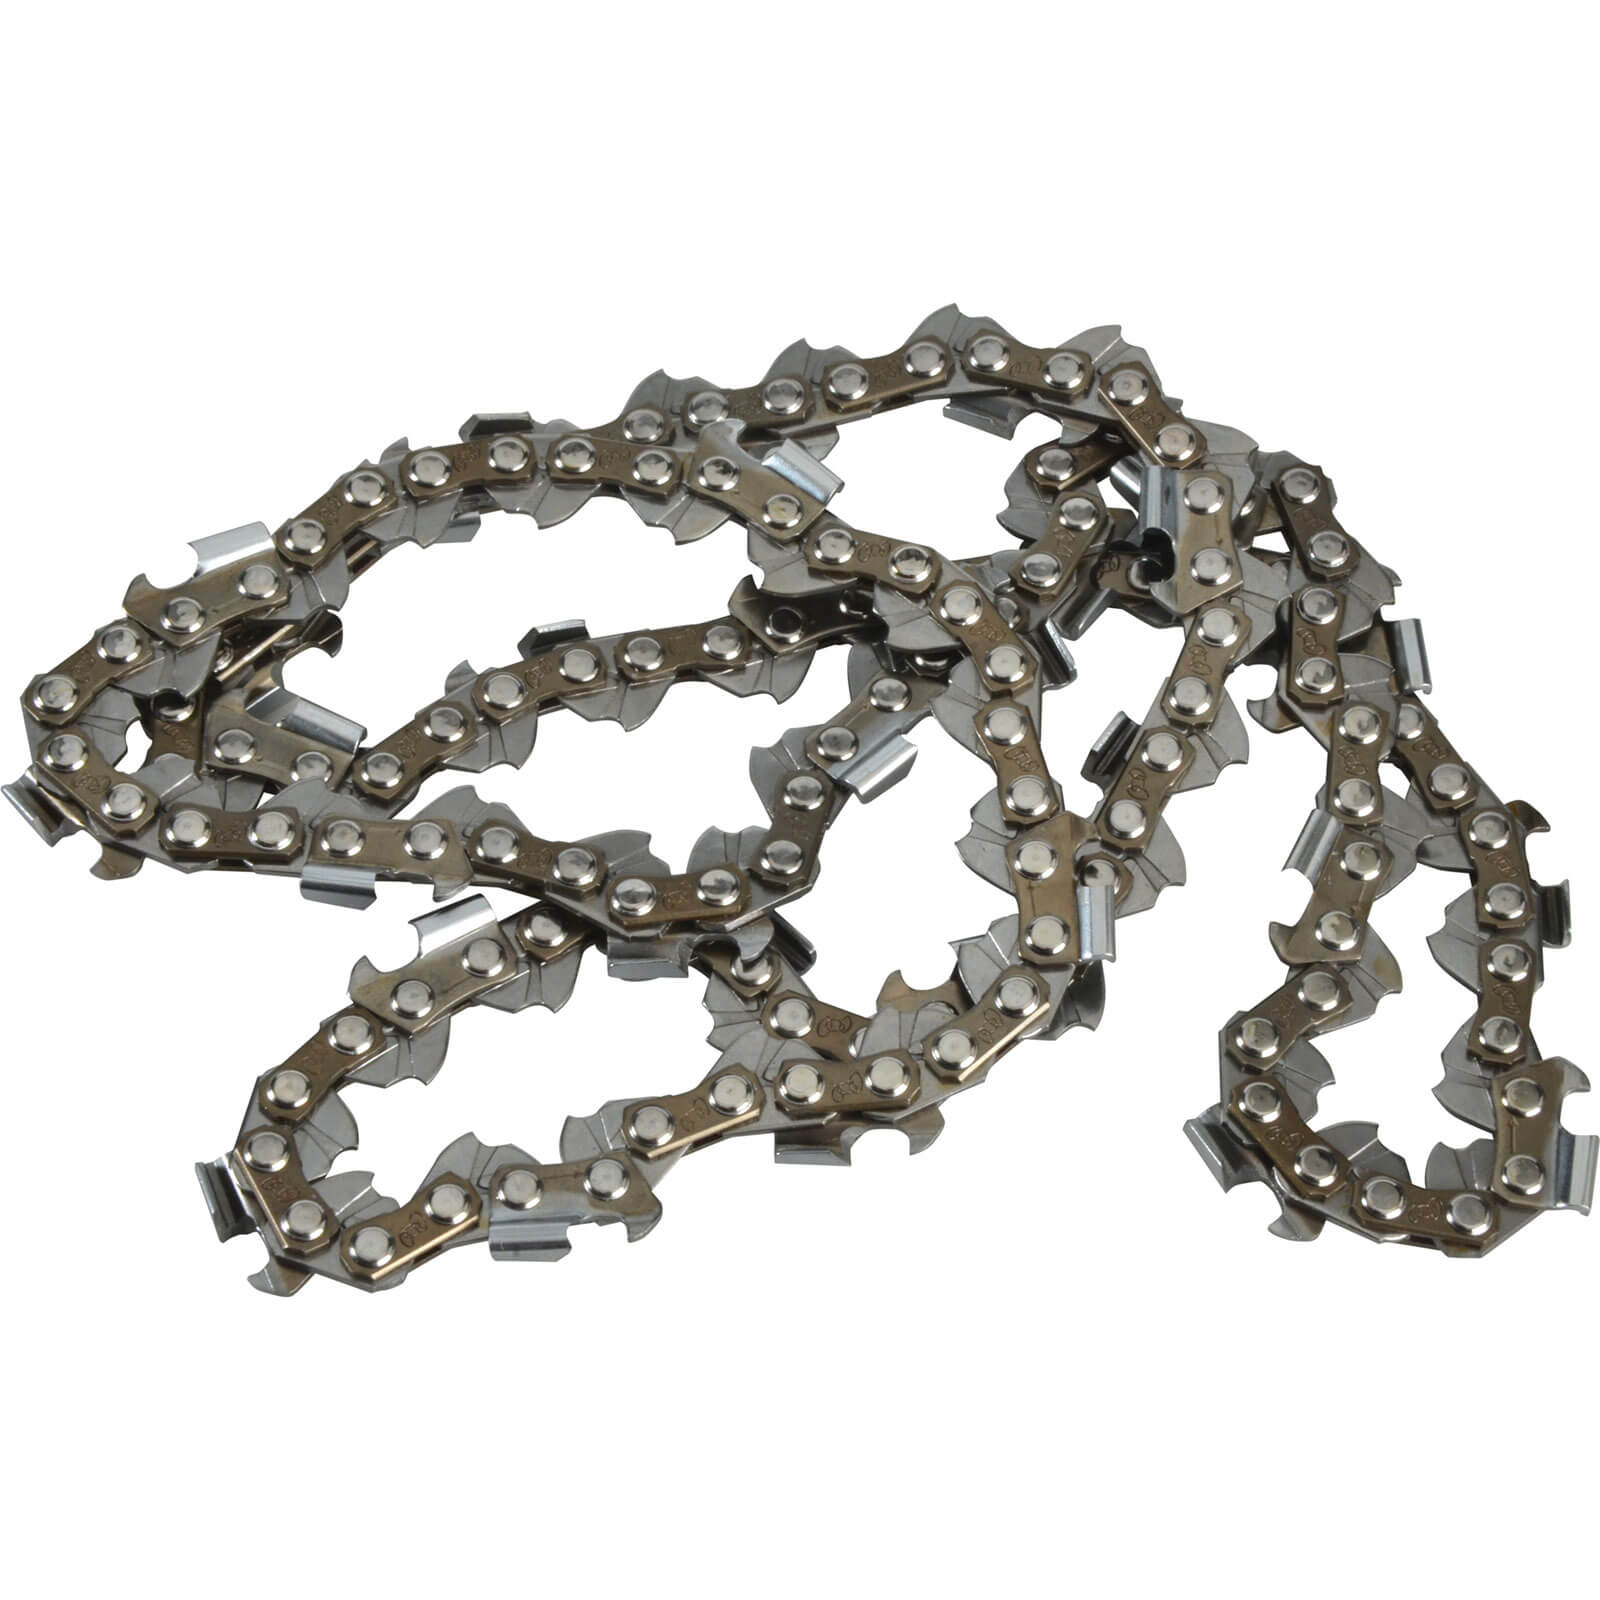 Photo of Alm Ch066 Replacement Chainsaw Chain Fits Saws With A 40cm Bar And 66 Drive Links 400mm